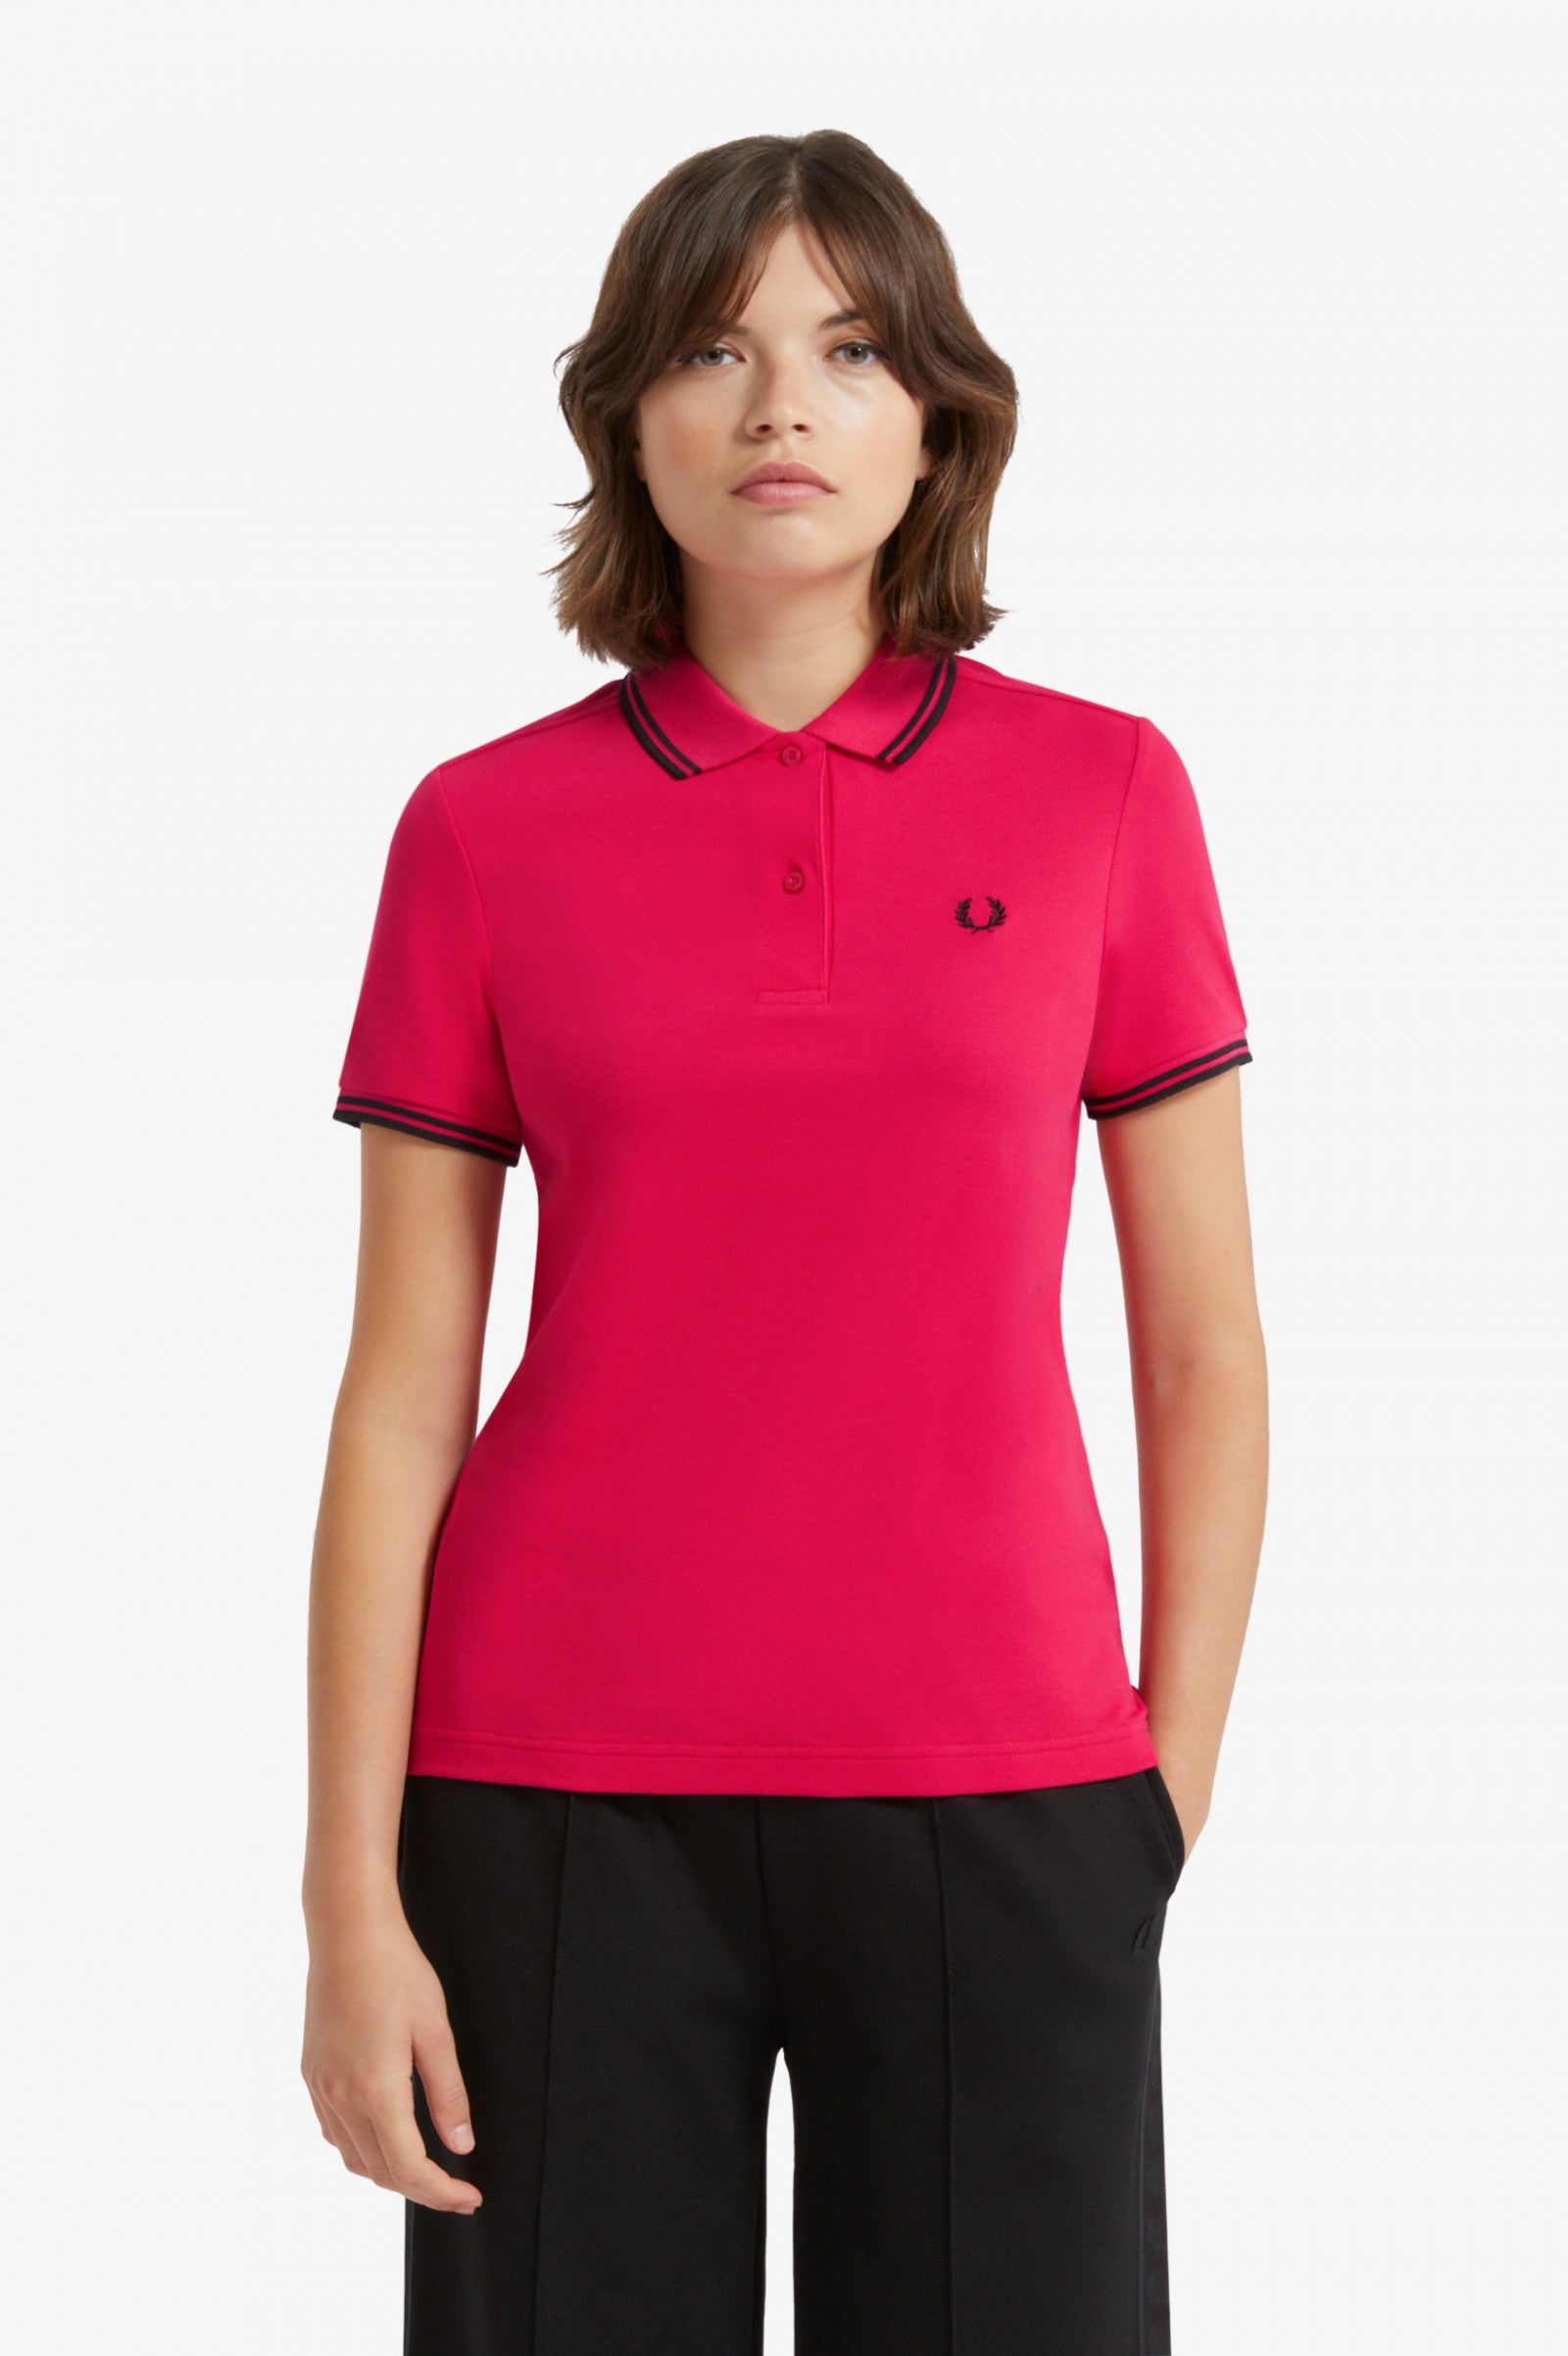 LADIES TWIN TIPPED FRED PERRY SHIRT (LOVE POTION/BLACK) – Posers